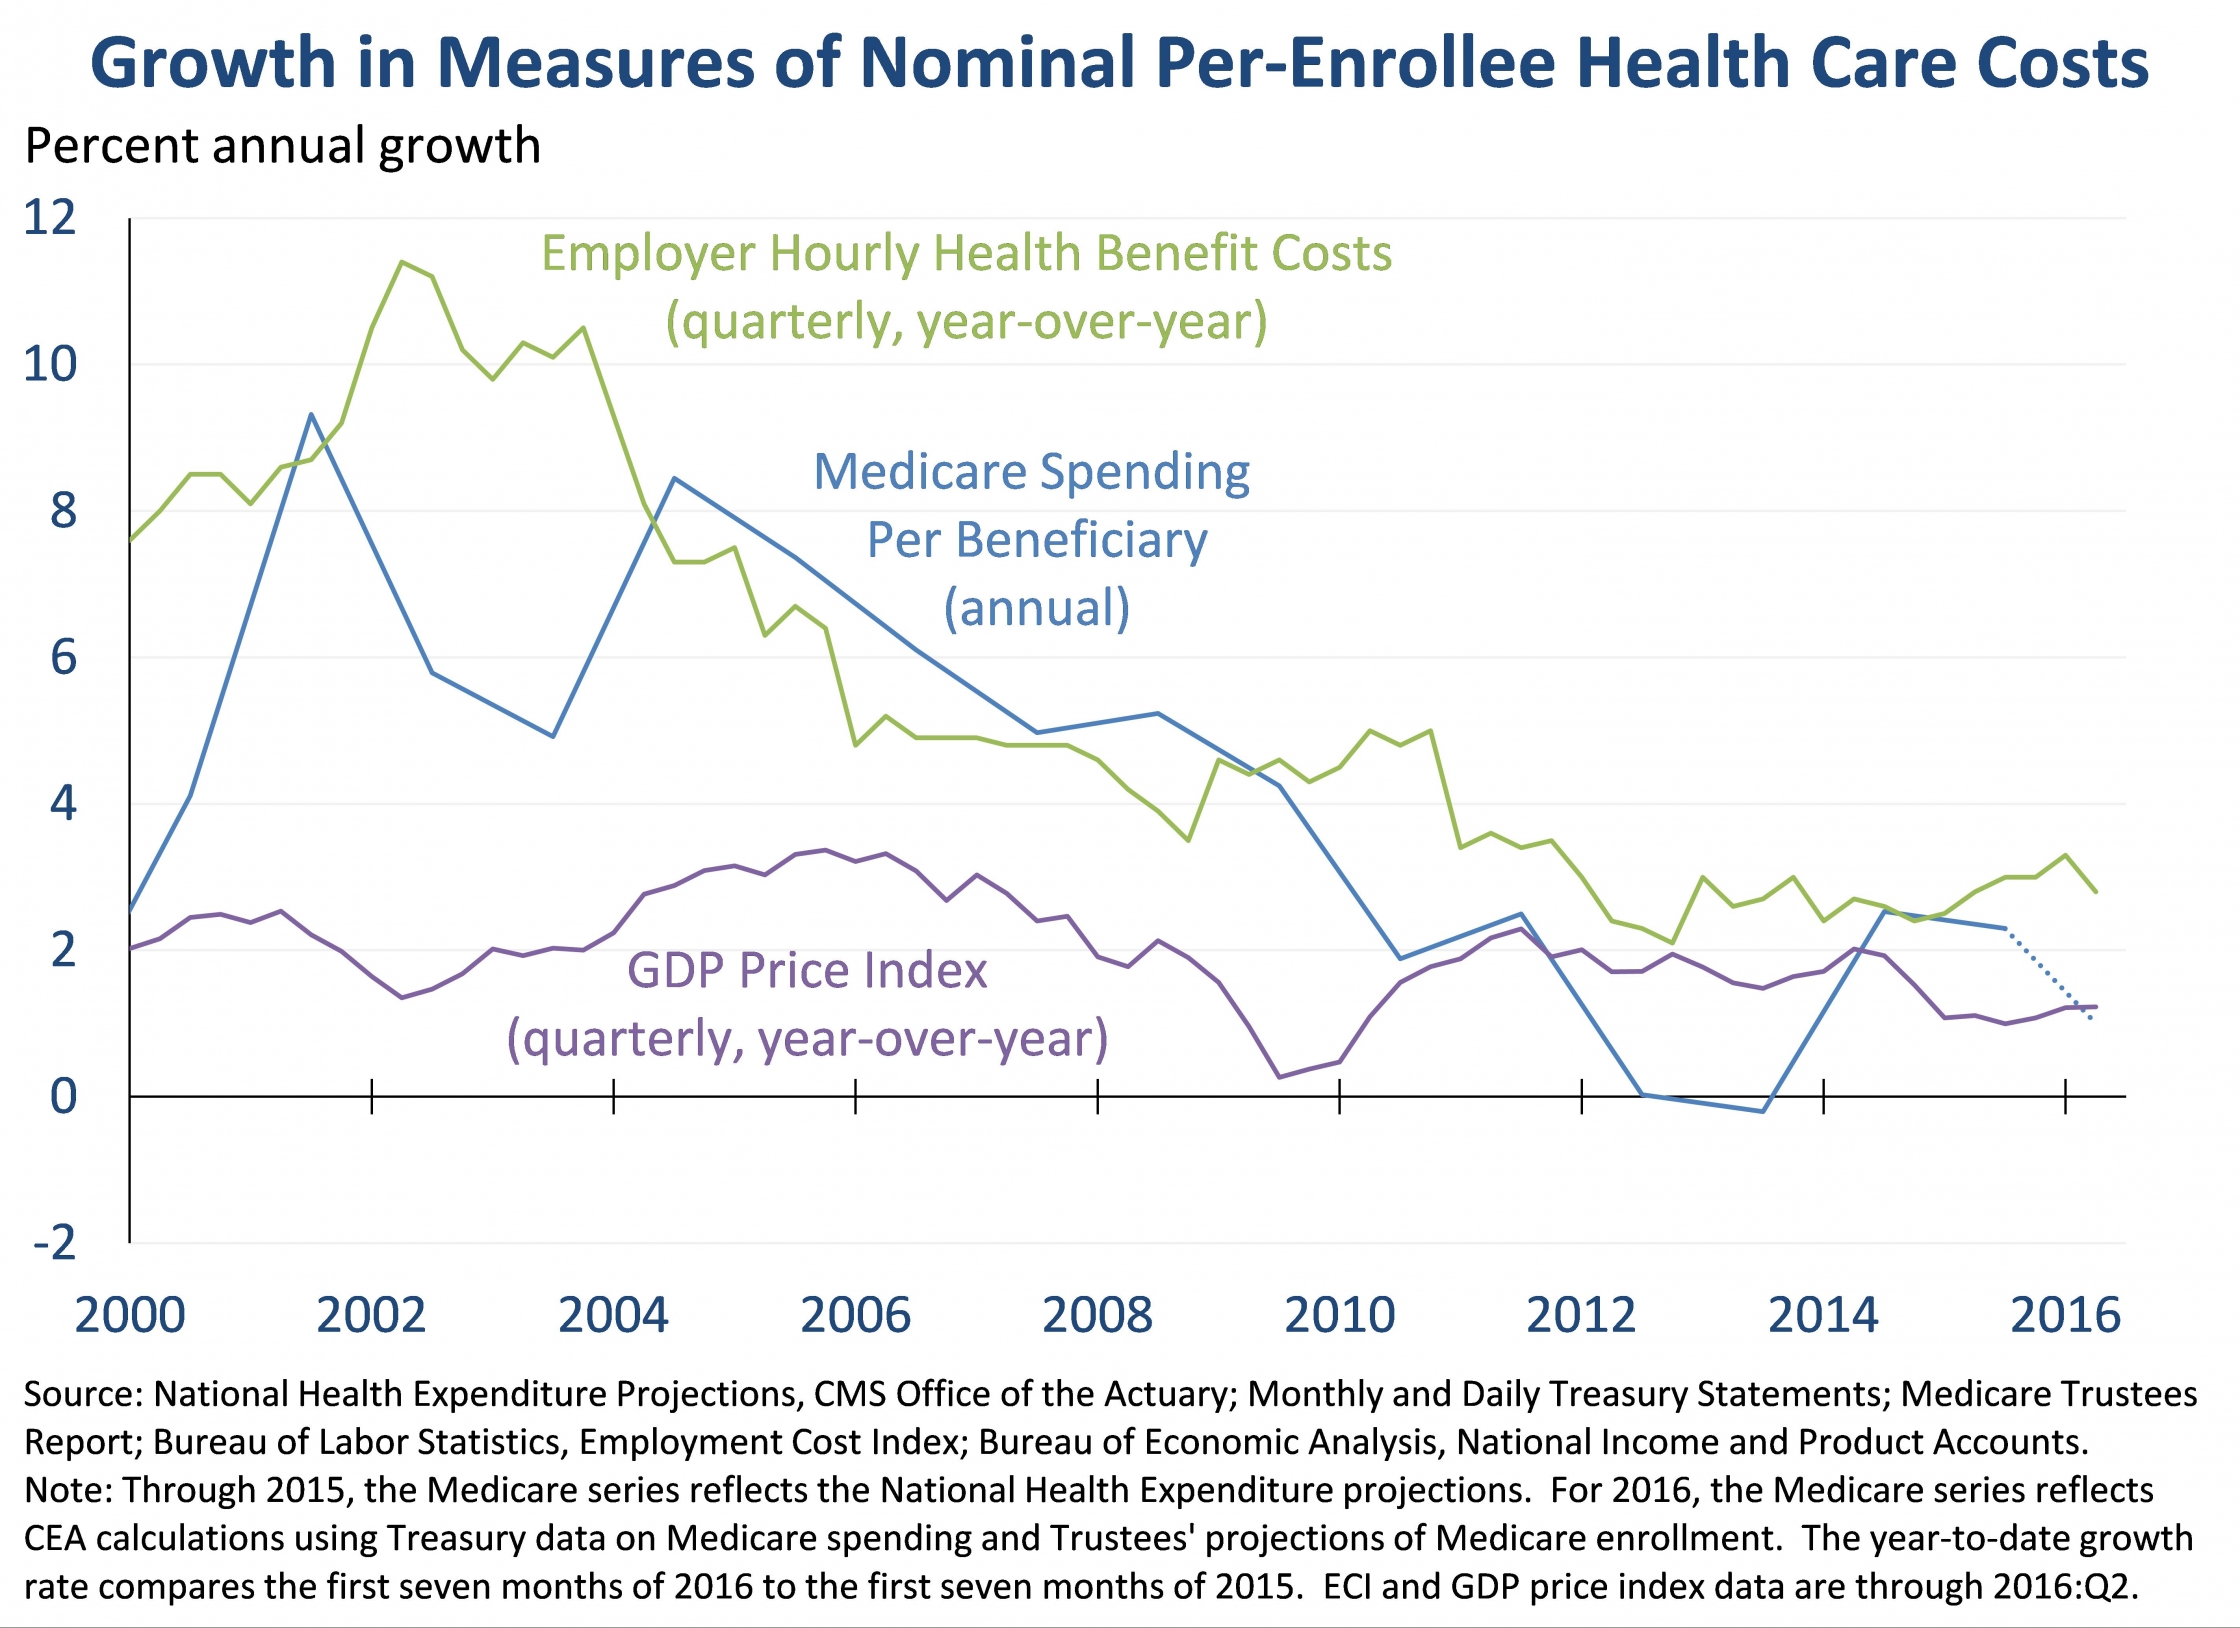 Growth in Measures of Nominal Per-Enrollee Health Care Costs